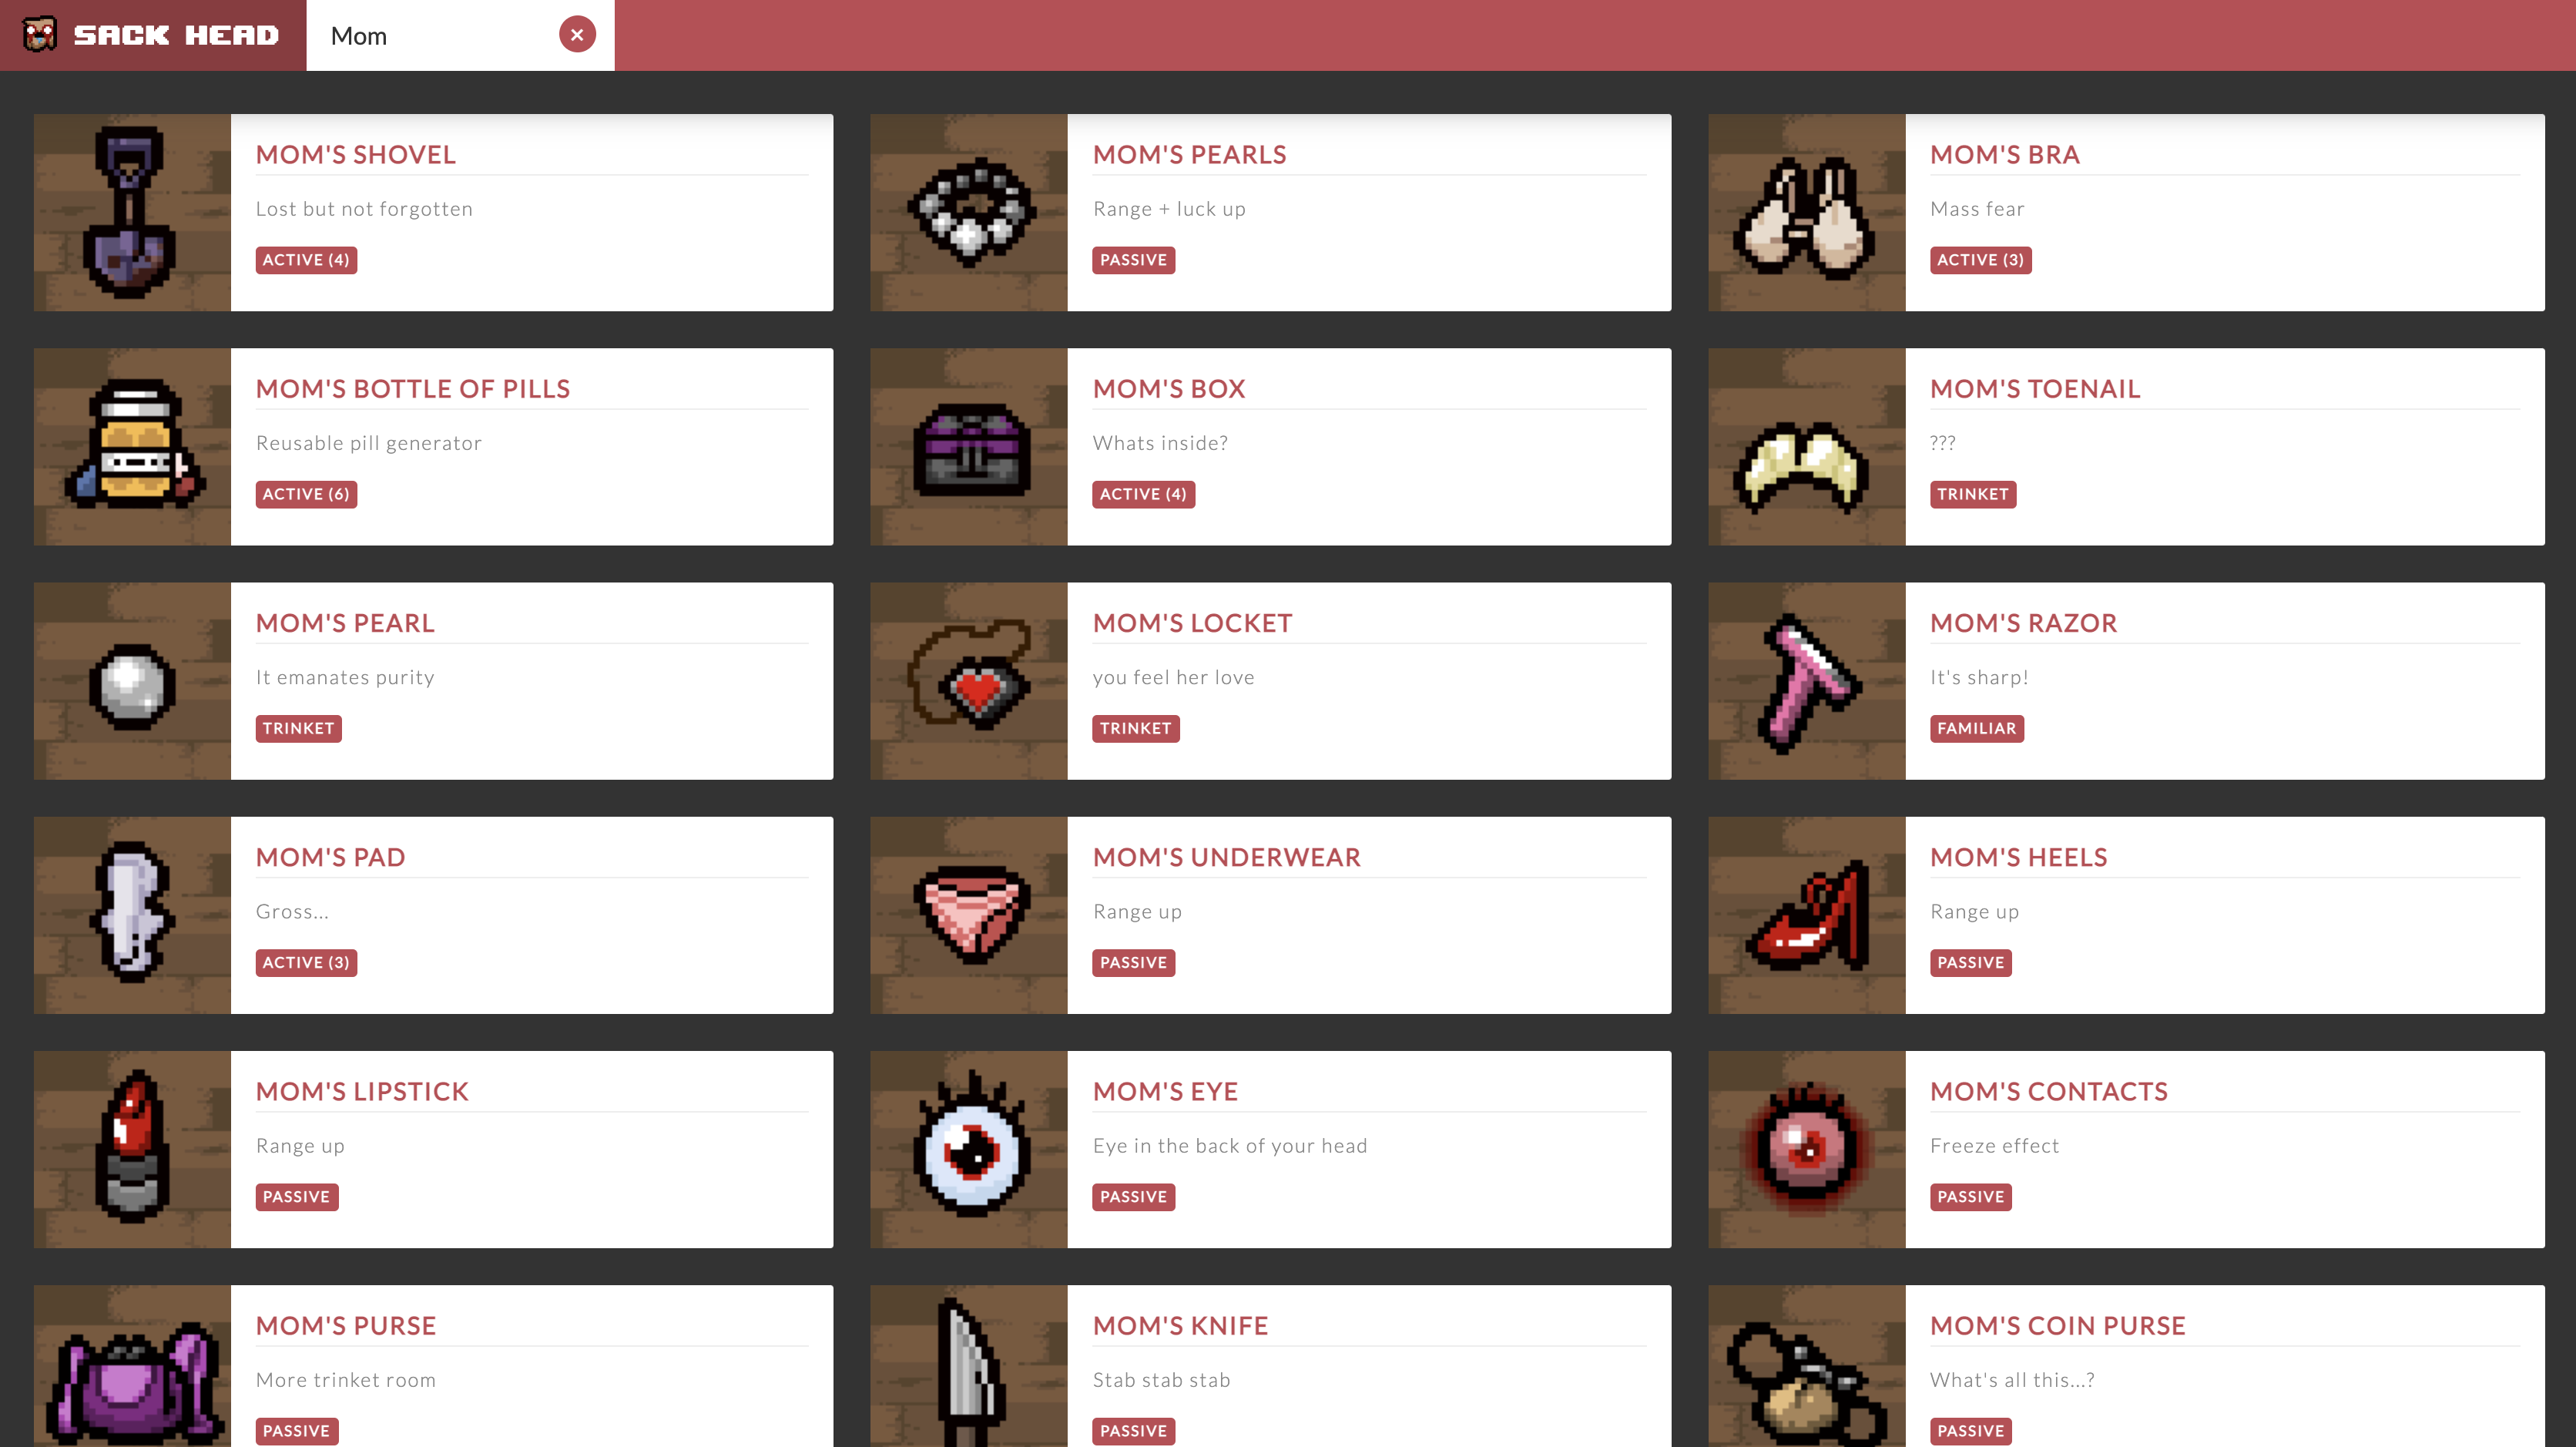 A screenshot of the Sack Head application displaying a filtered list of items.